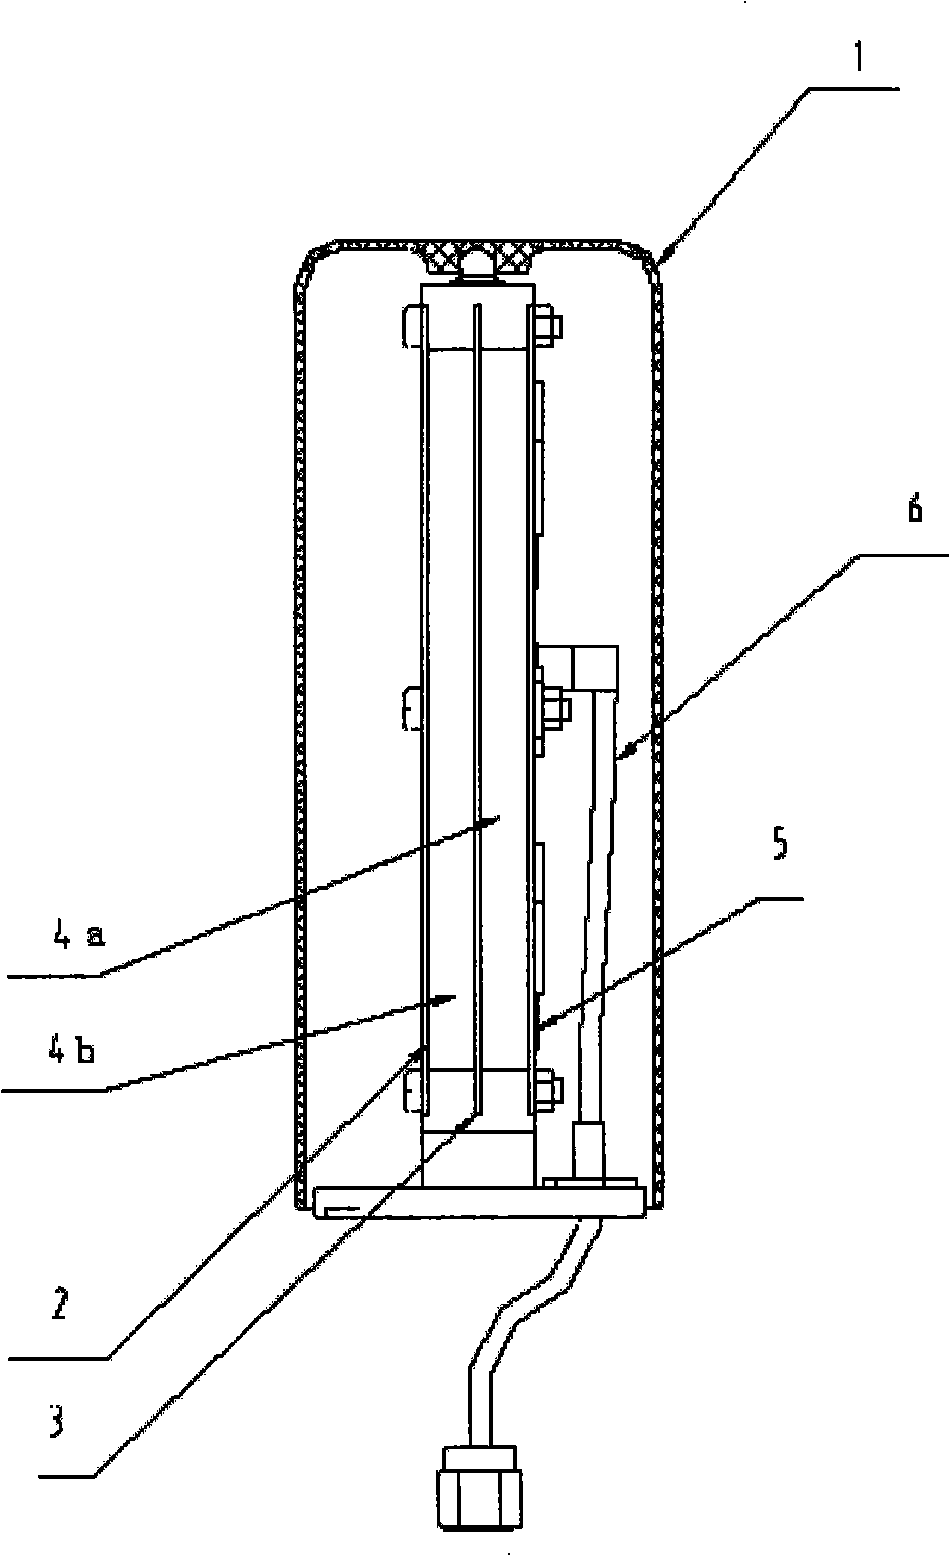 Power feed stacked microstrip antenna array with circular polarized wide-band capacitor compensating probe